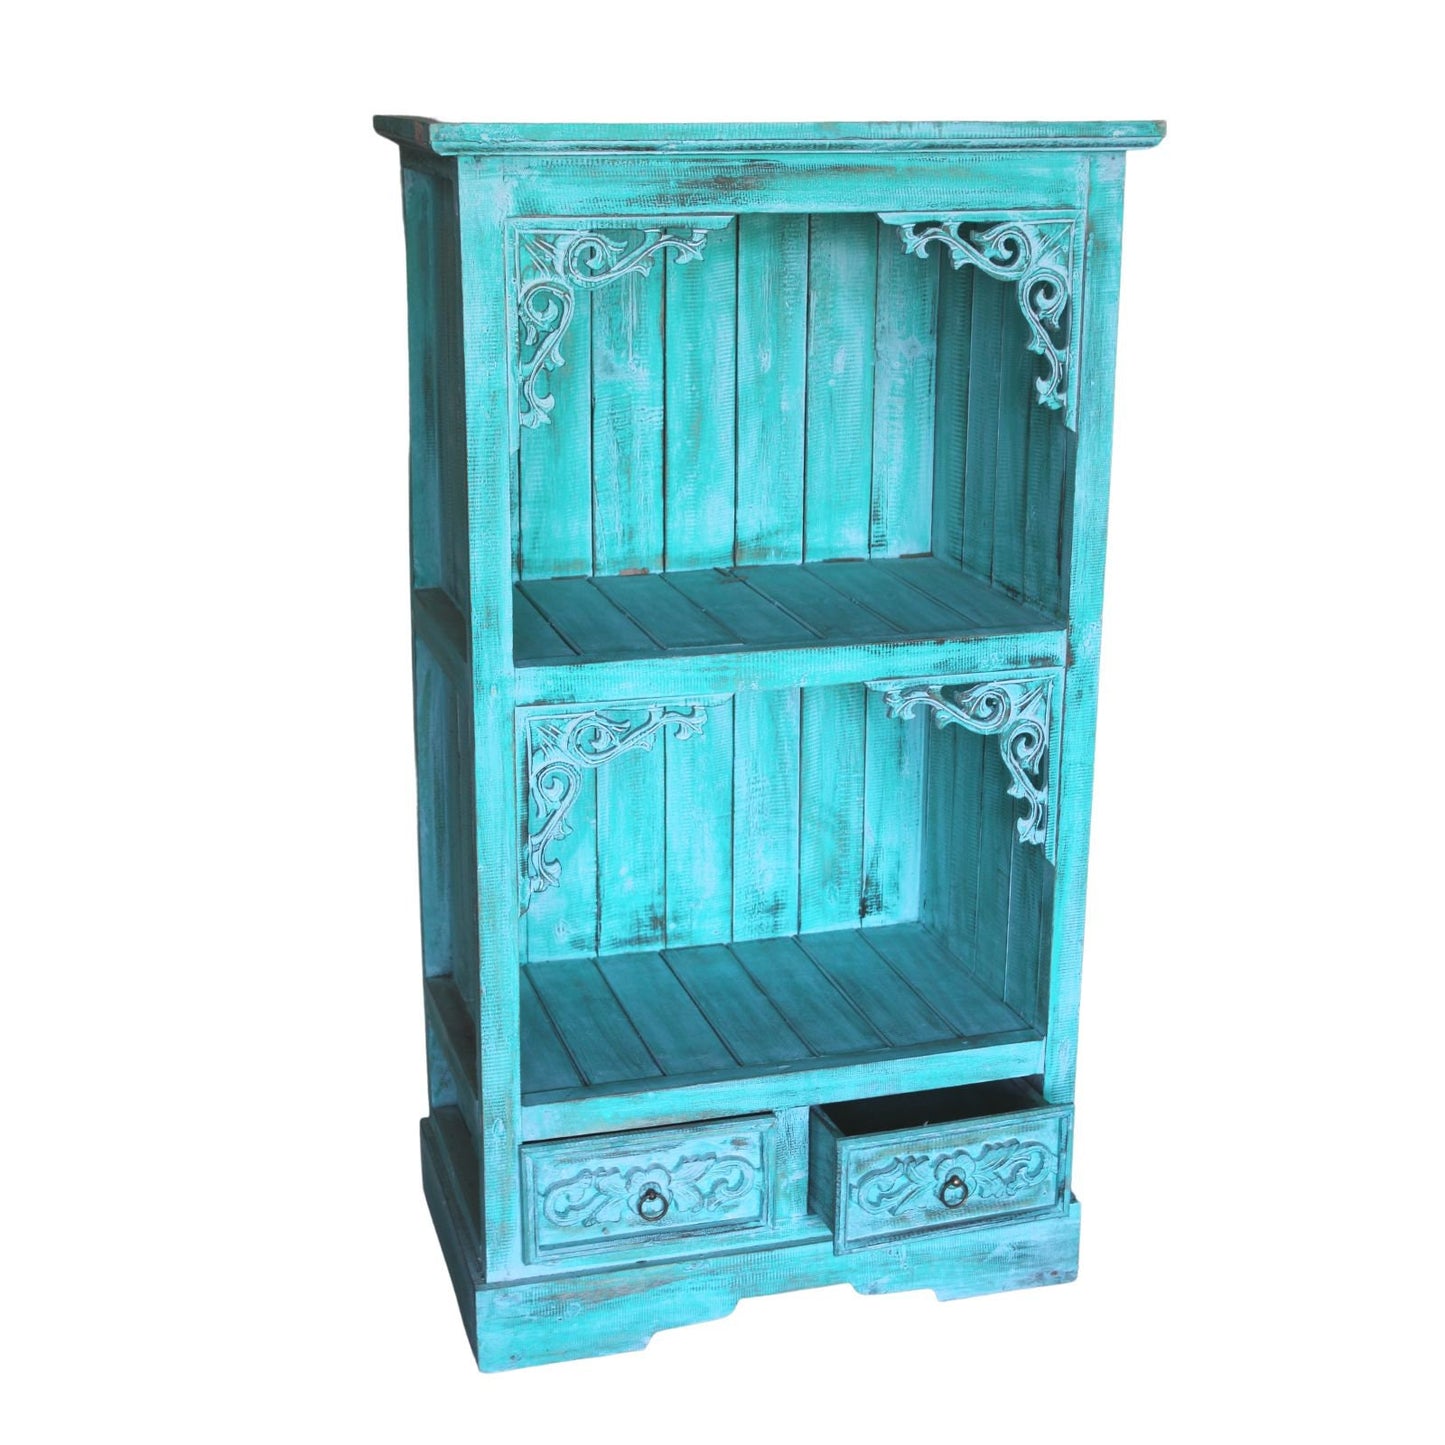 Albasia Bathroom Cabinets-Turquoise hand carved, exquisite detailing--Dimensions: H - 120cm; W - 66.7cm; D - 40cm. Wonkey Donkey Bazaar